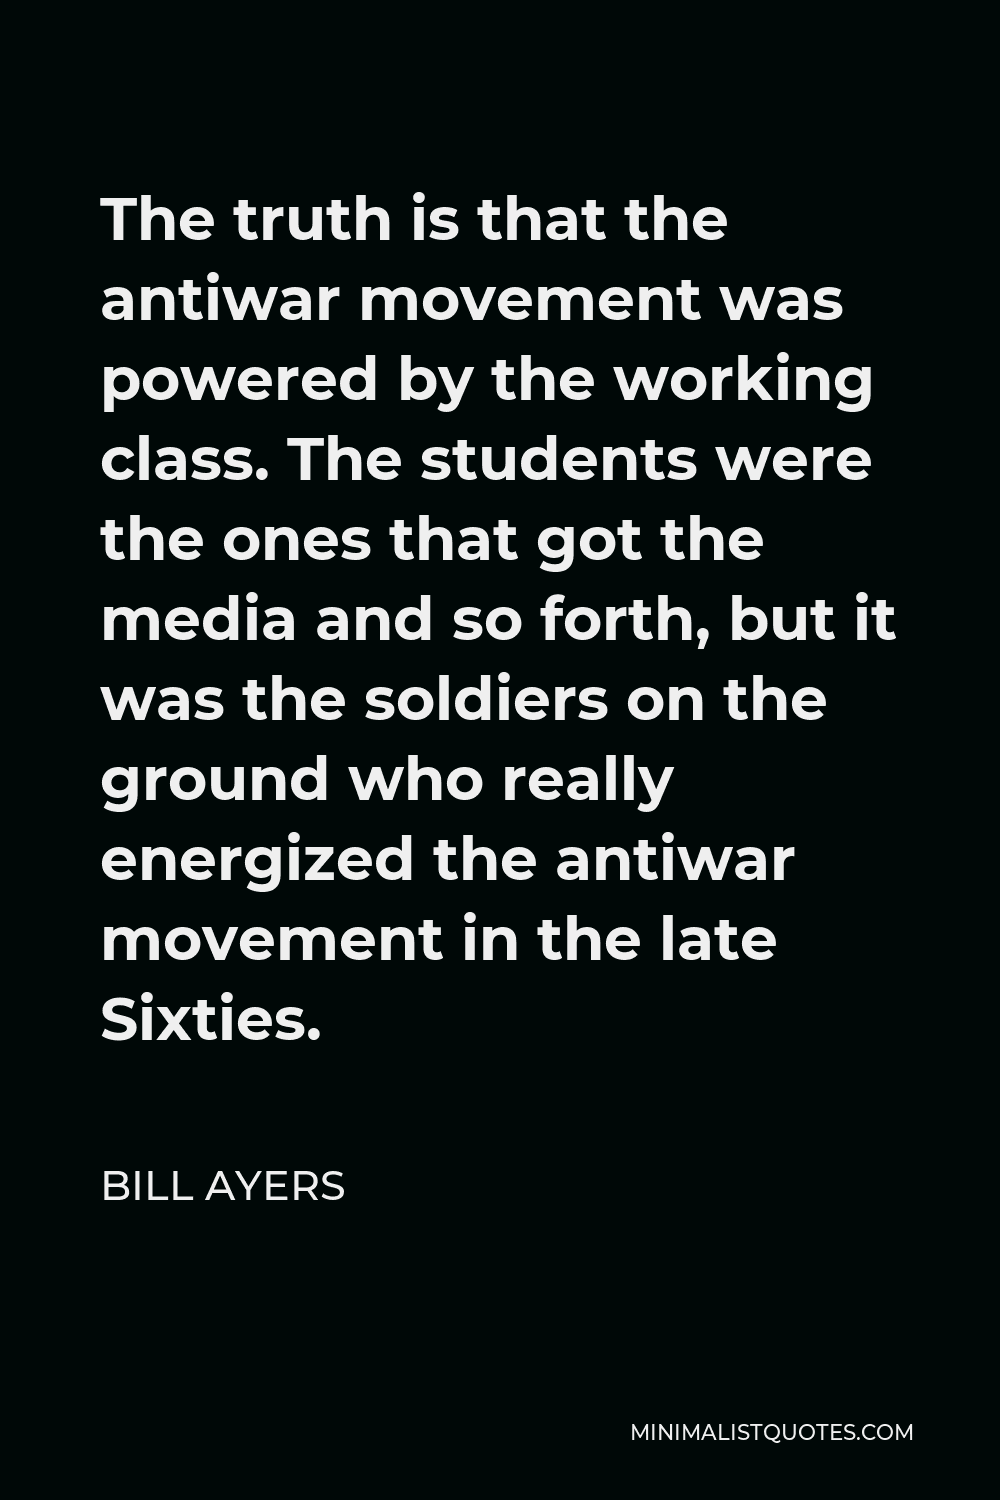 Bill Ayers Quote - The truth is that the antiwar movement was powered by the working class. The students were the ones that got the media and so forth, but it was the soldiers on the ground who really energized the antiwar movement in the late Sixties.